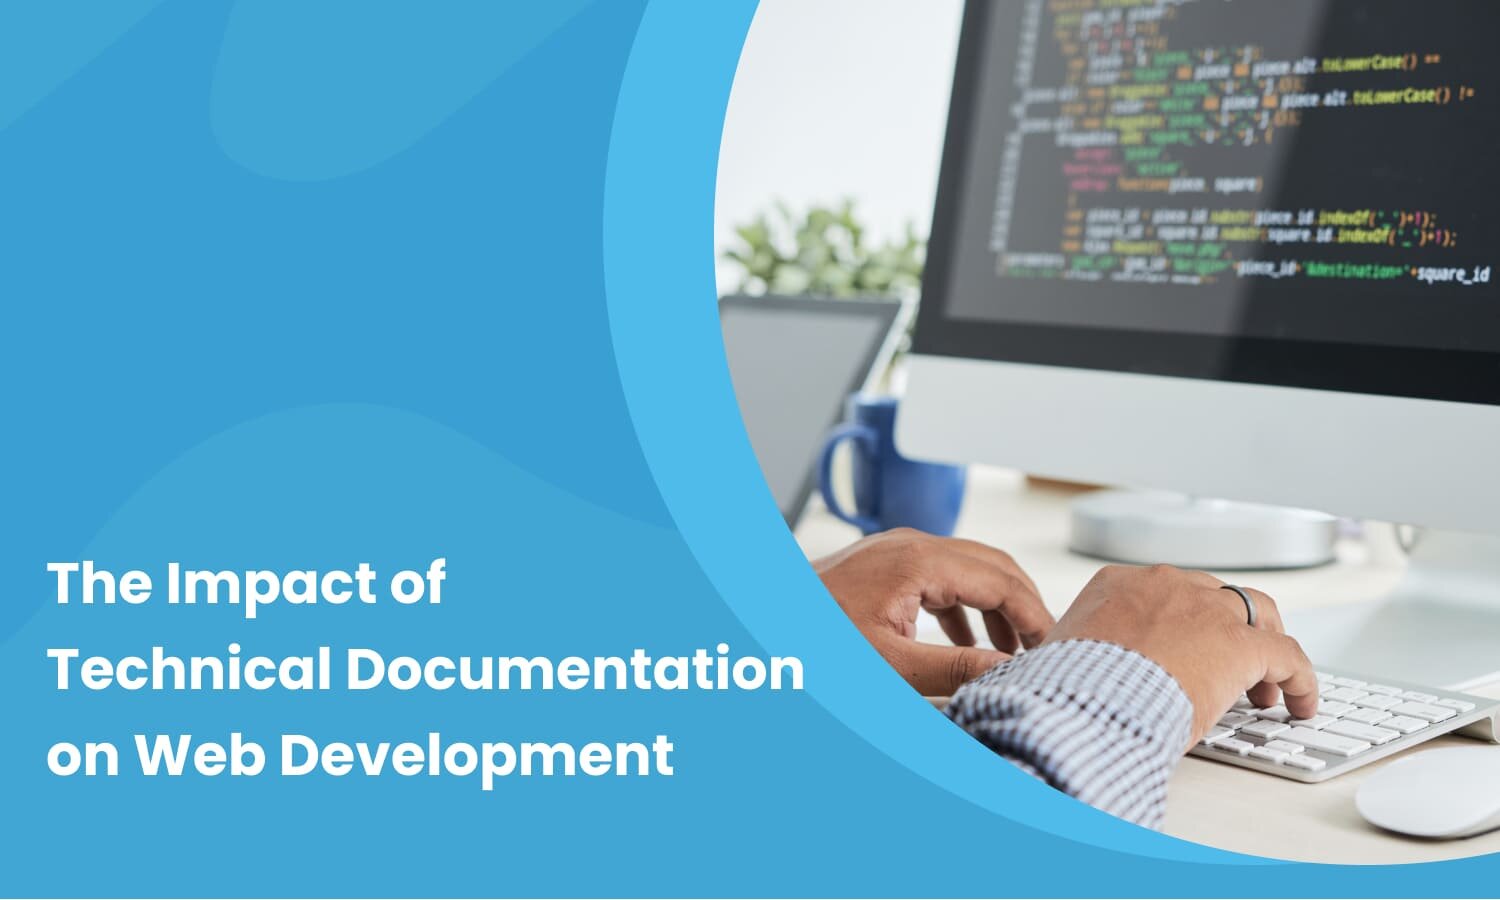 The impact of technical documentation